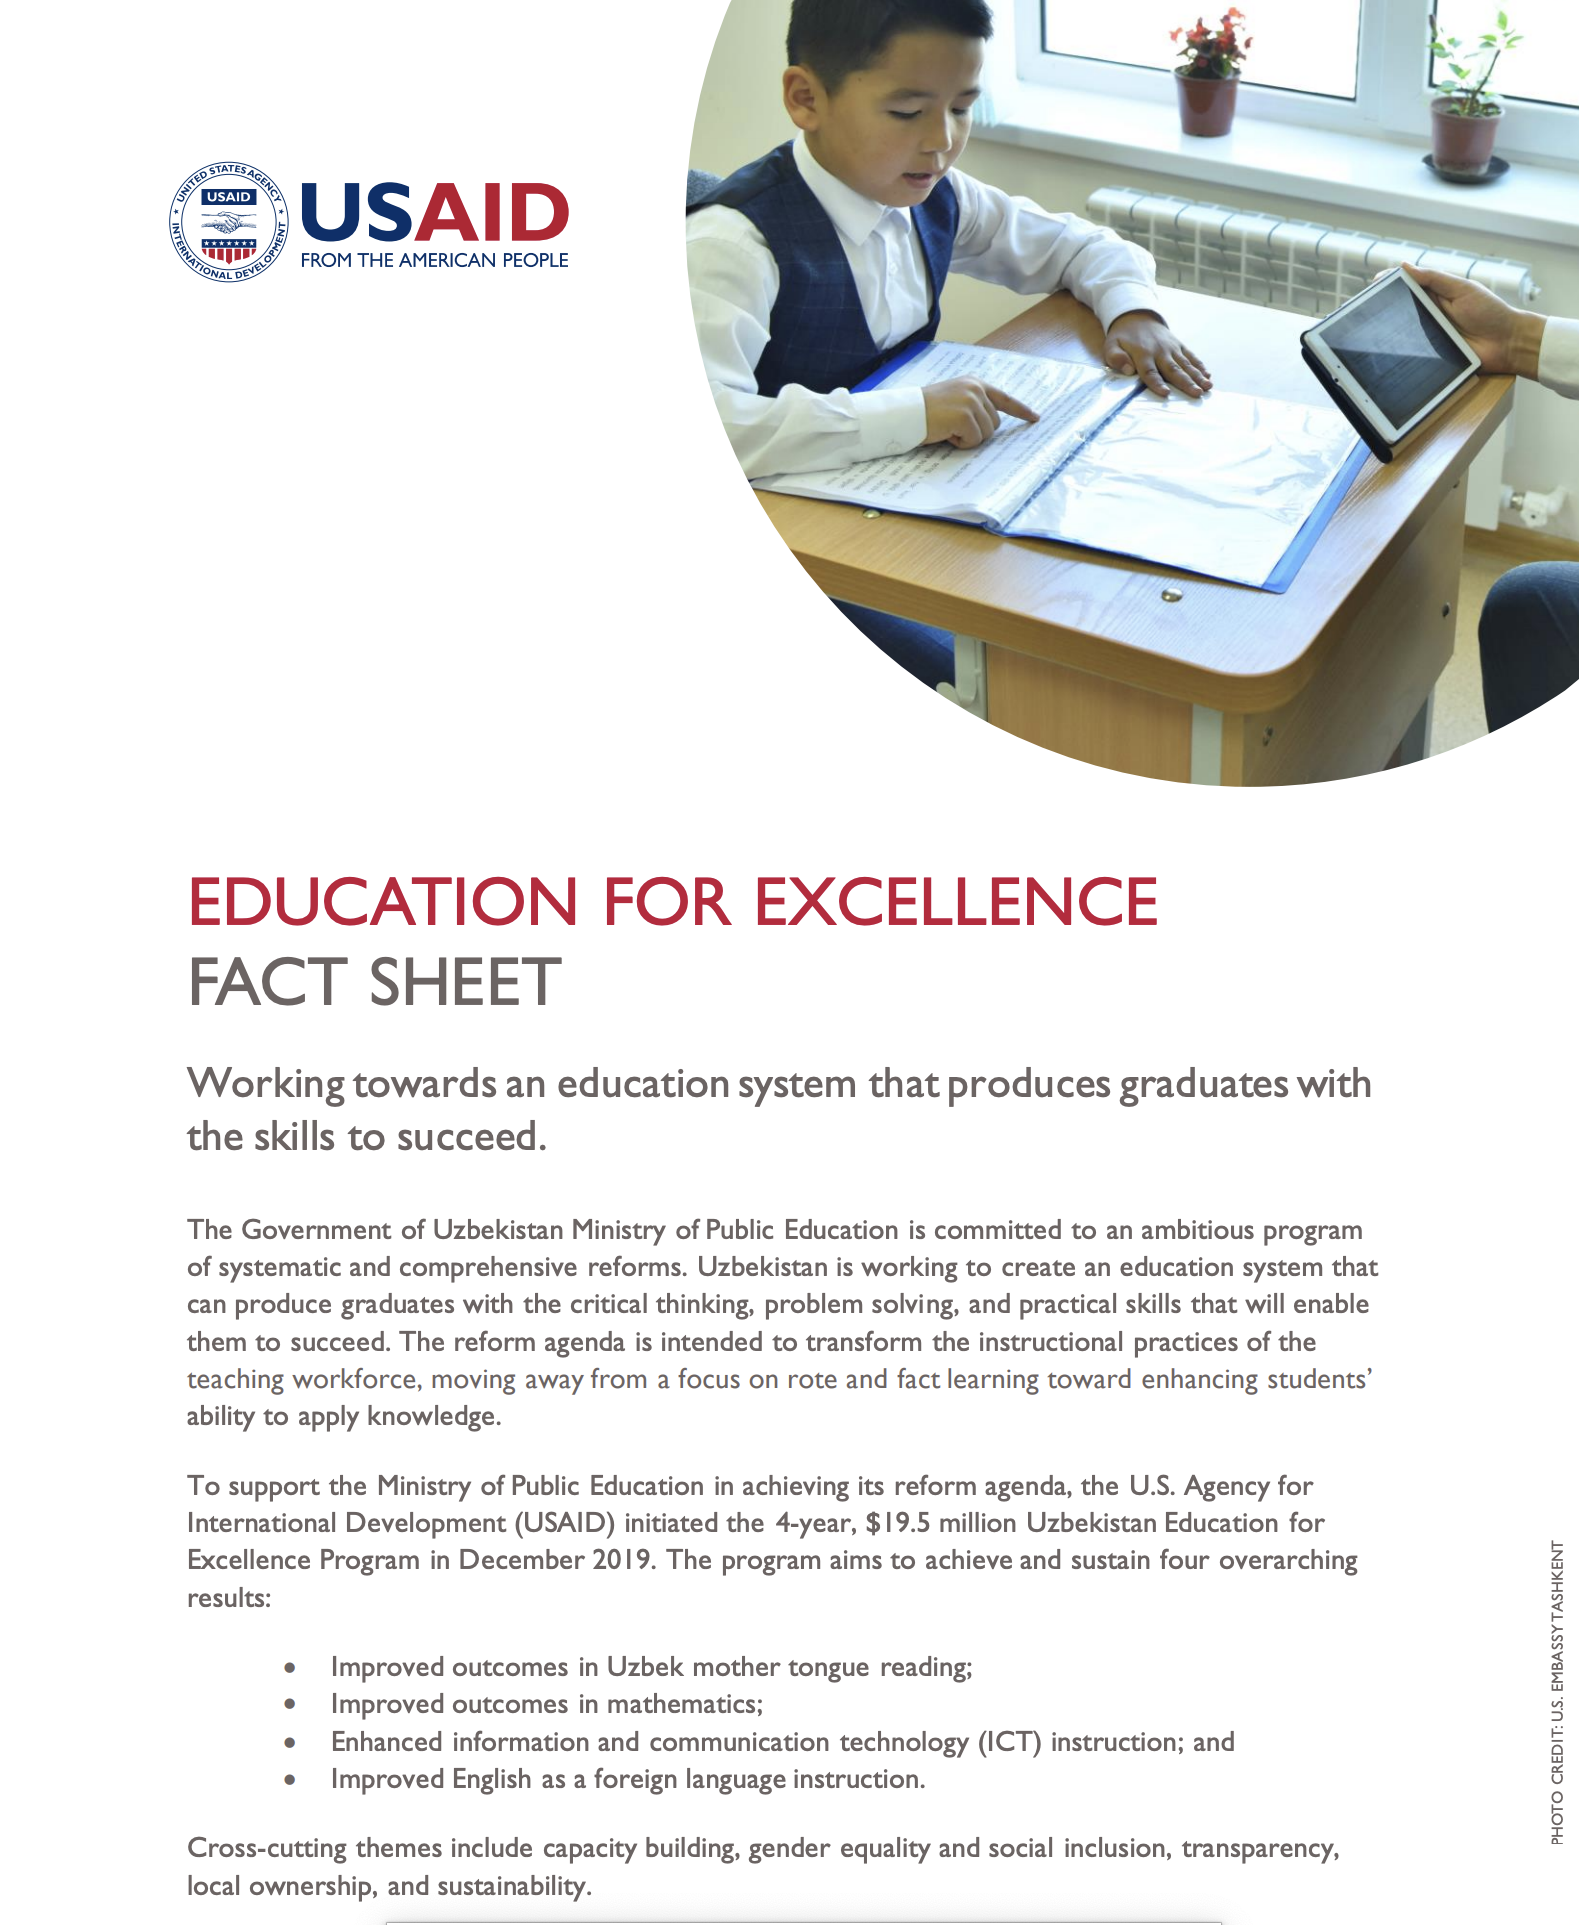 Education for Excellence Fact Sheet